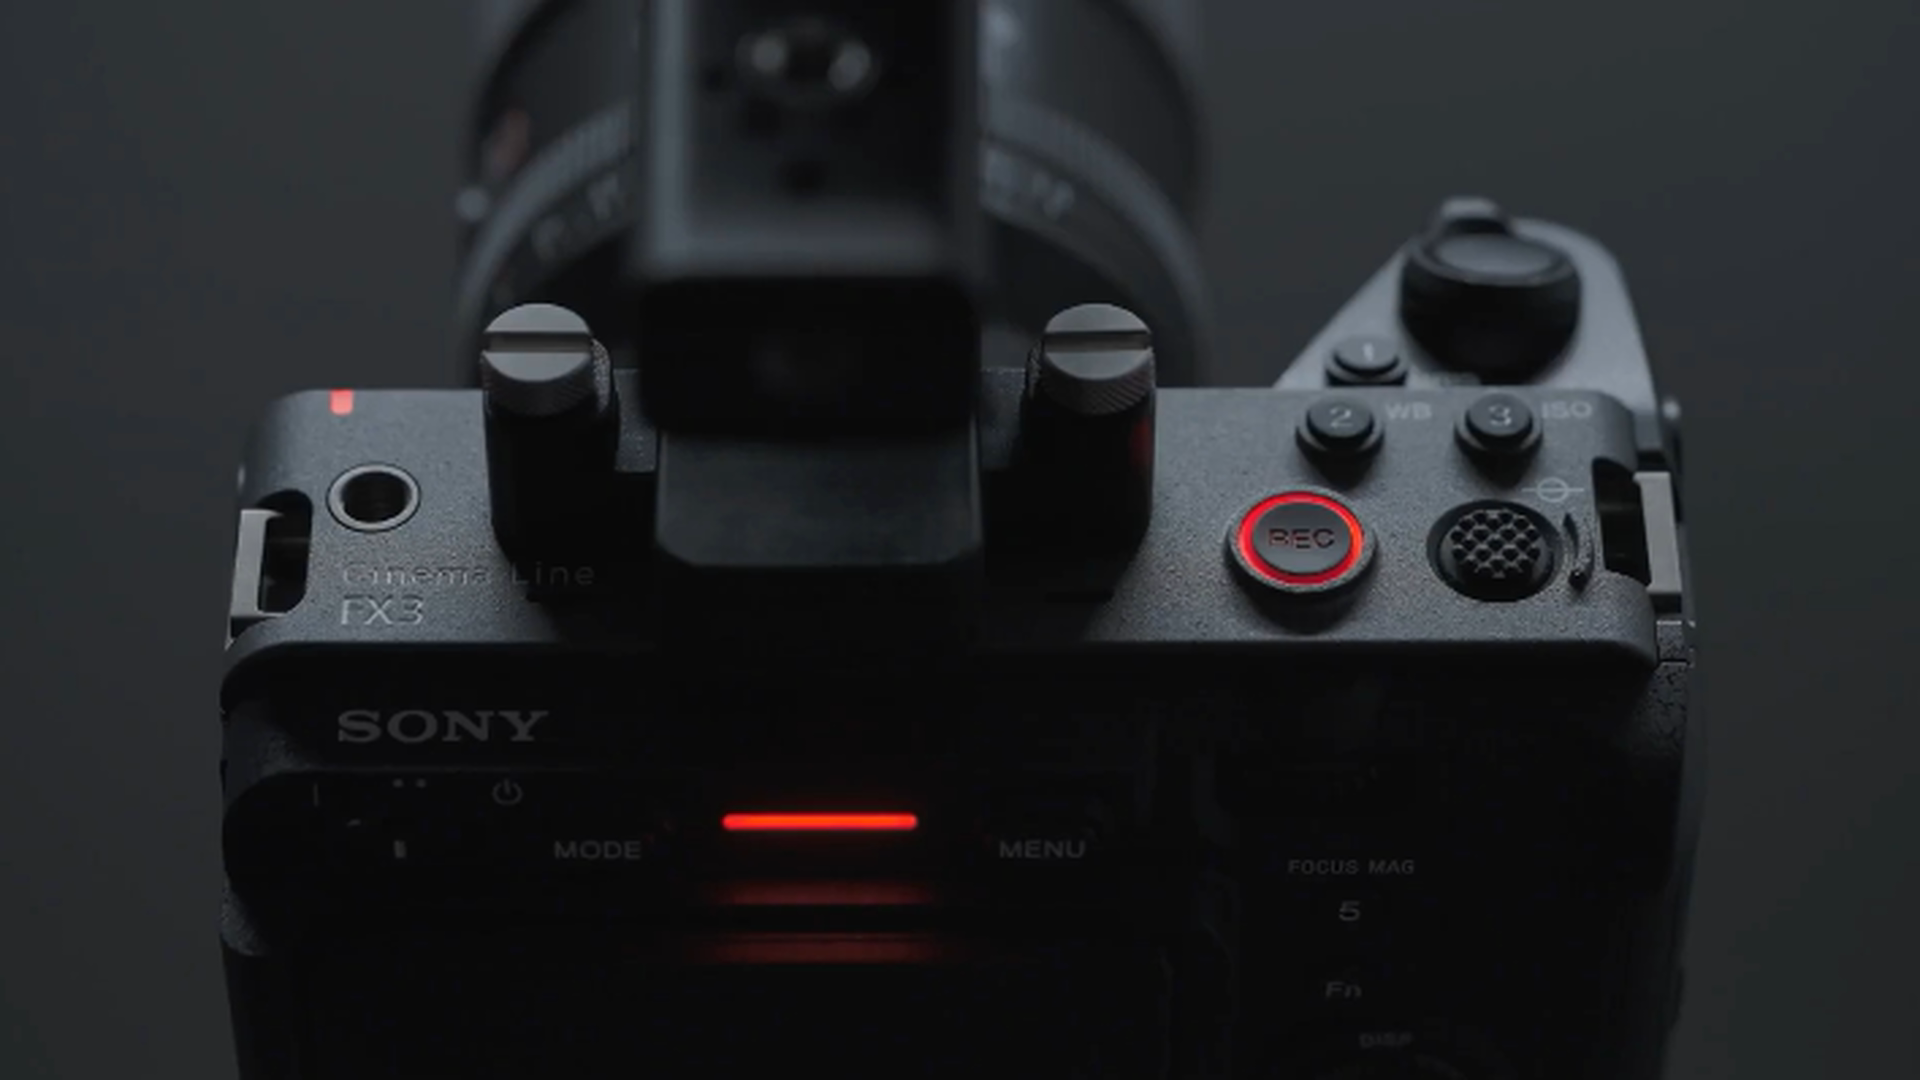 New Cinema Line camera announcement on February 23, 2021 _ Sony_20210224_000404.151.png